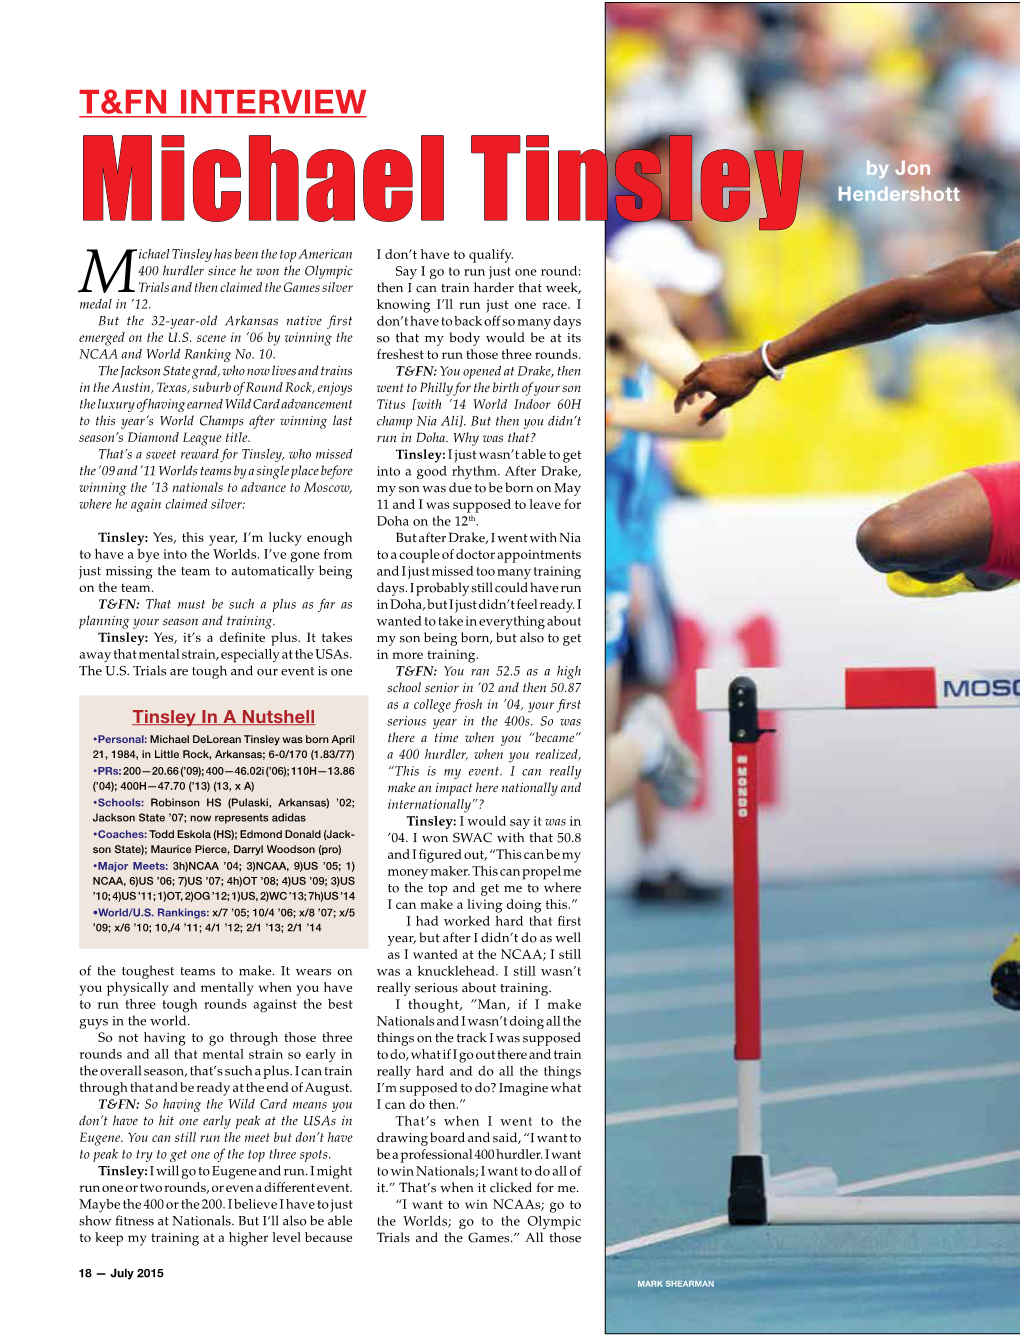 Michael Tinsley Hendershott Ichael Tinsley Has Been the Top American I Don’T Have to Qualify